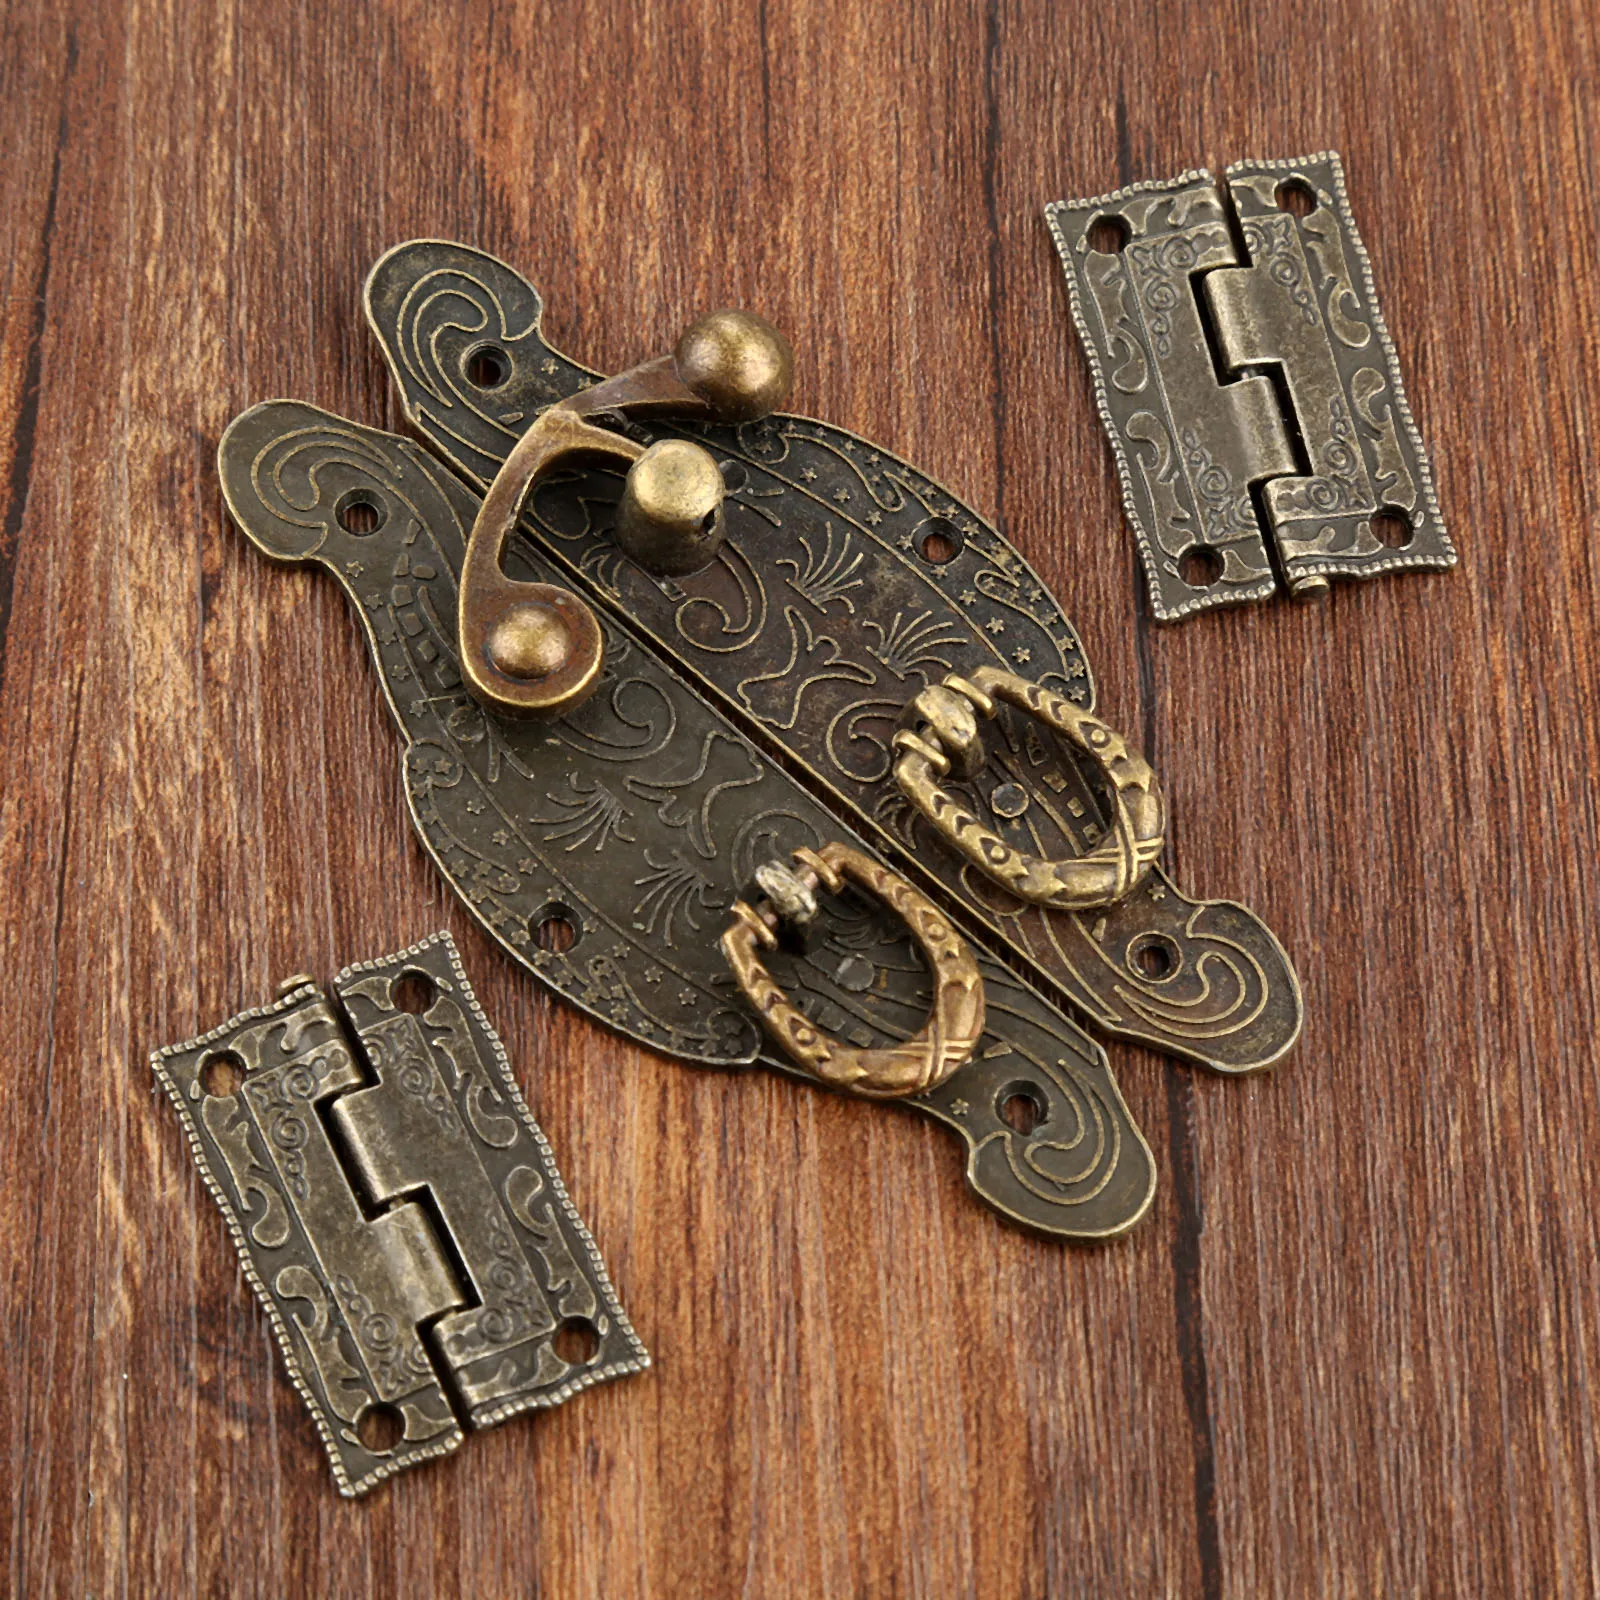 

2Pcs Antique Bronze Cabinet Hinges +Jewelry Wooden Box Case Toggle Hasp Latch Furniture Accessories Vintage Hardware